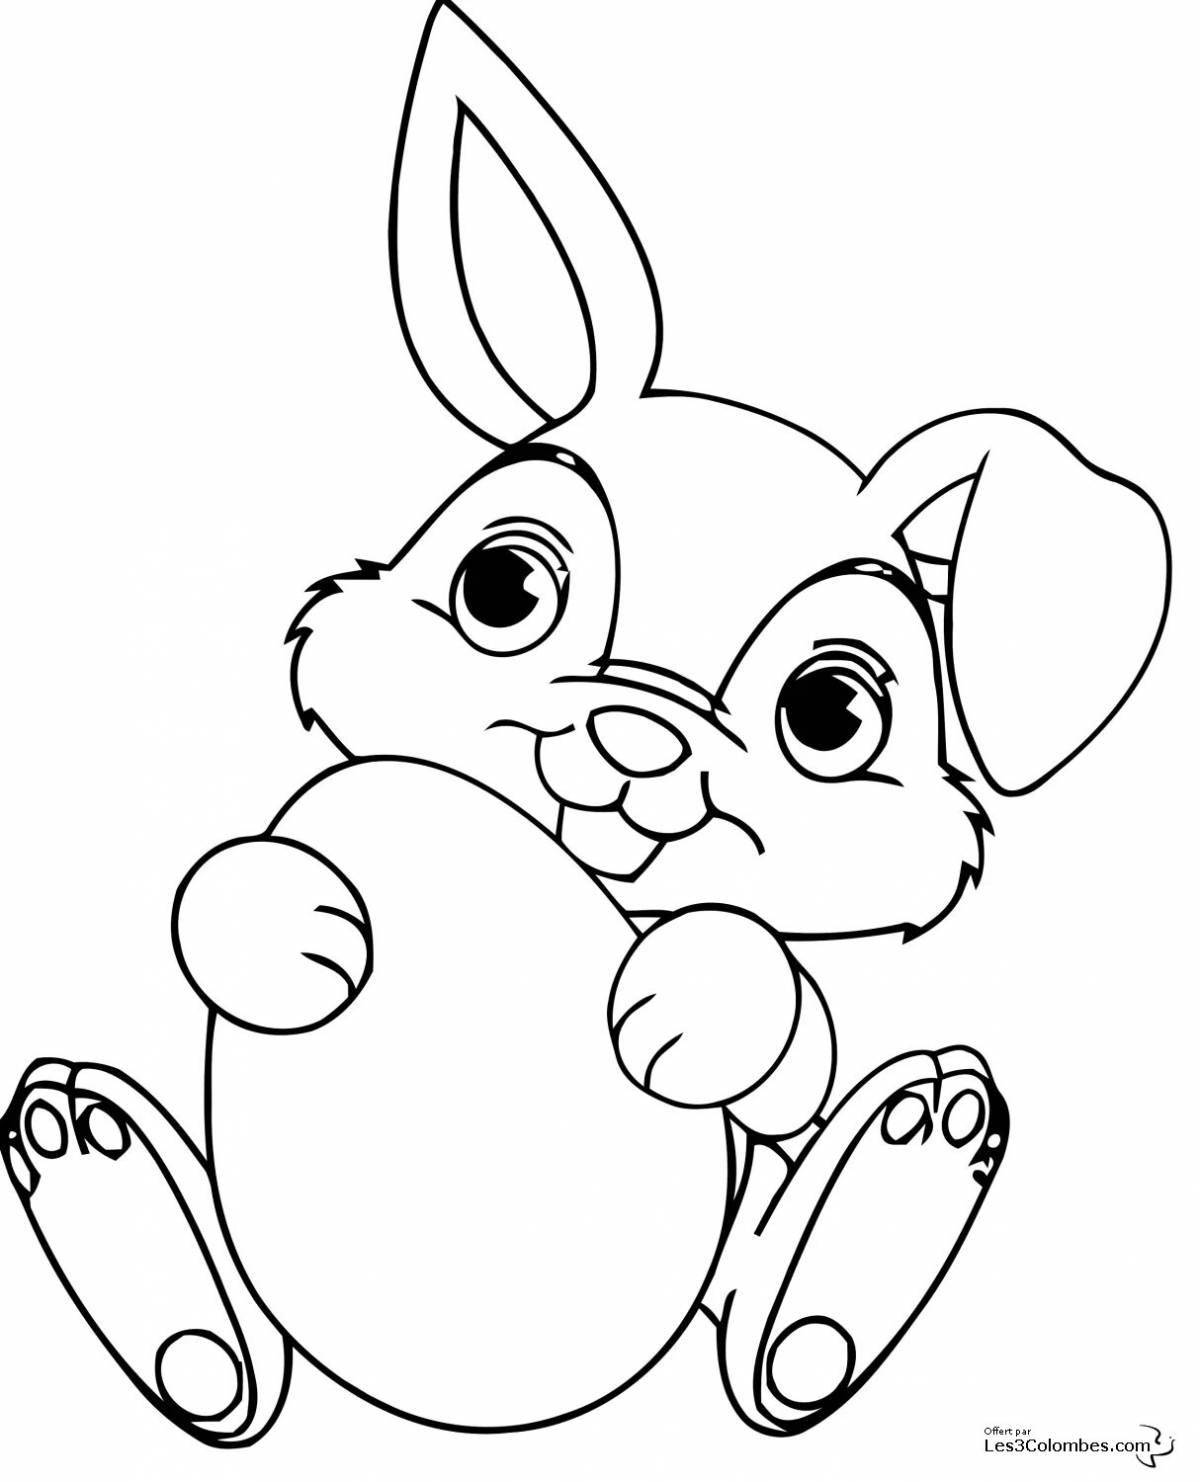 Fancy coloring rabbit with a bow